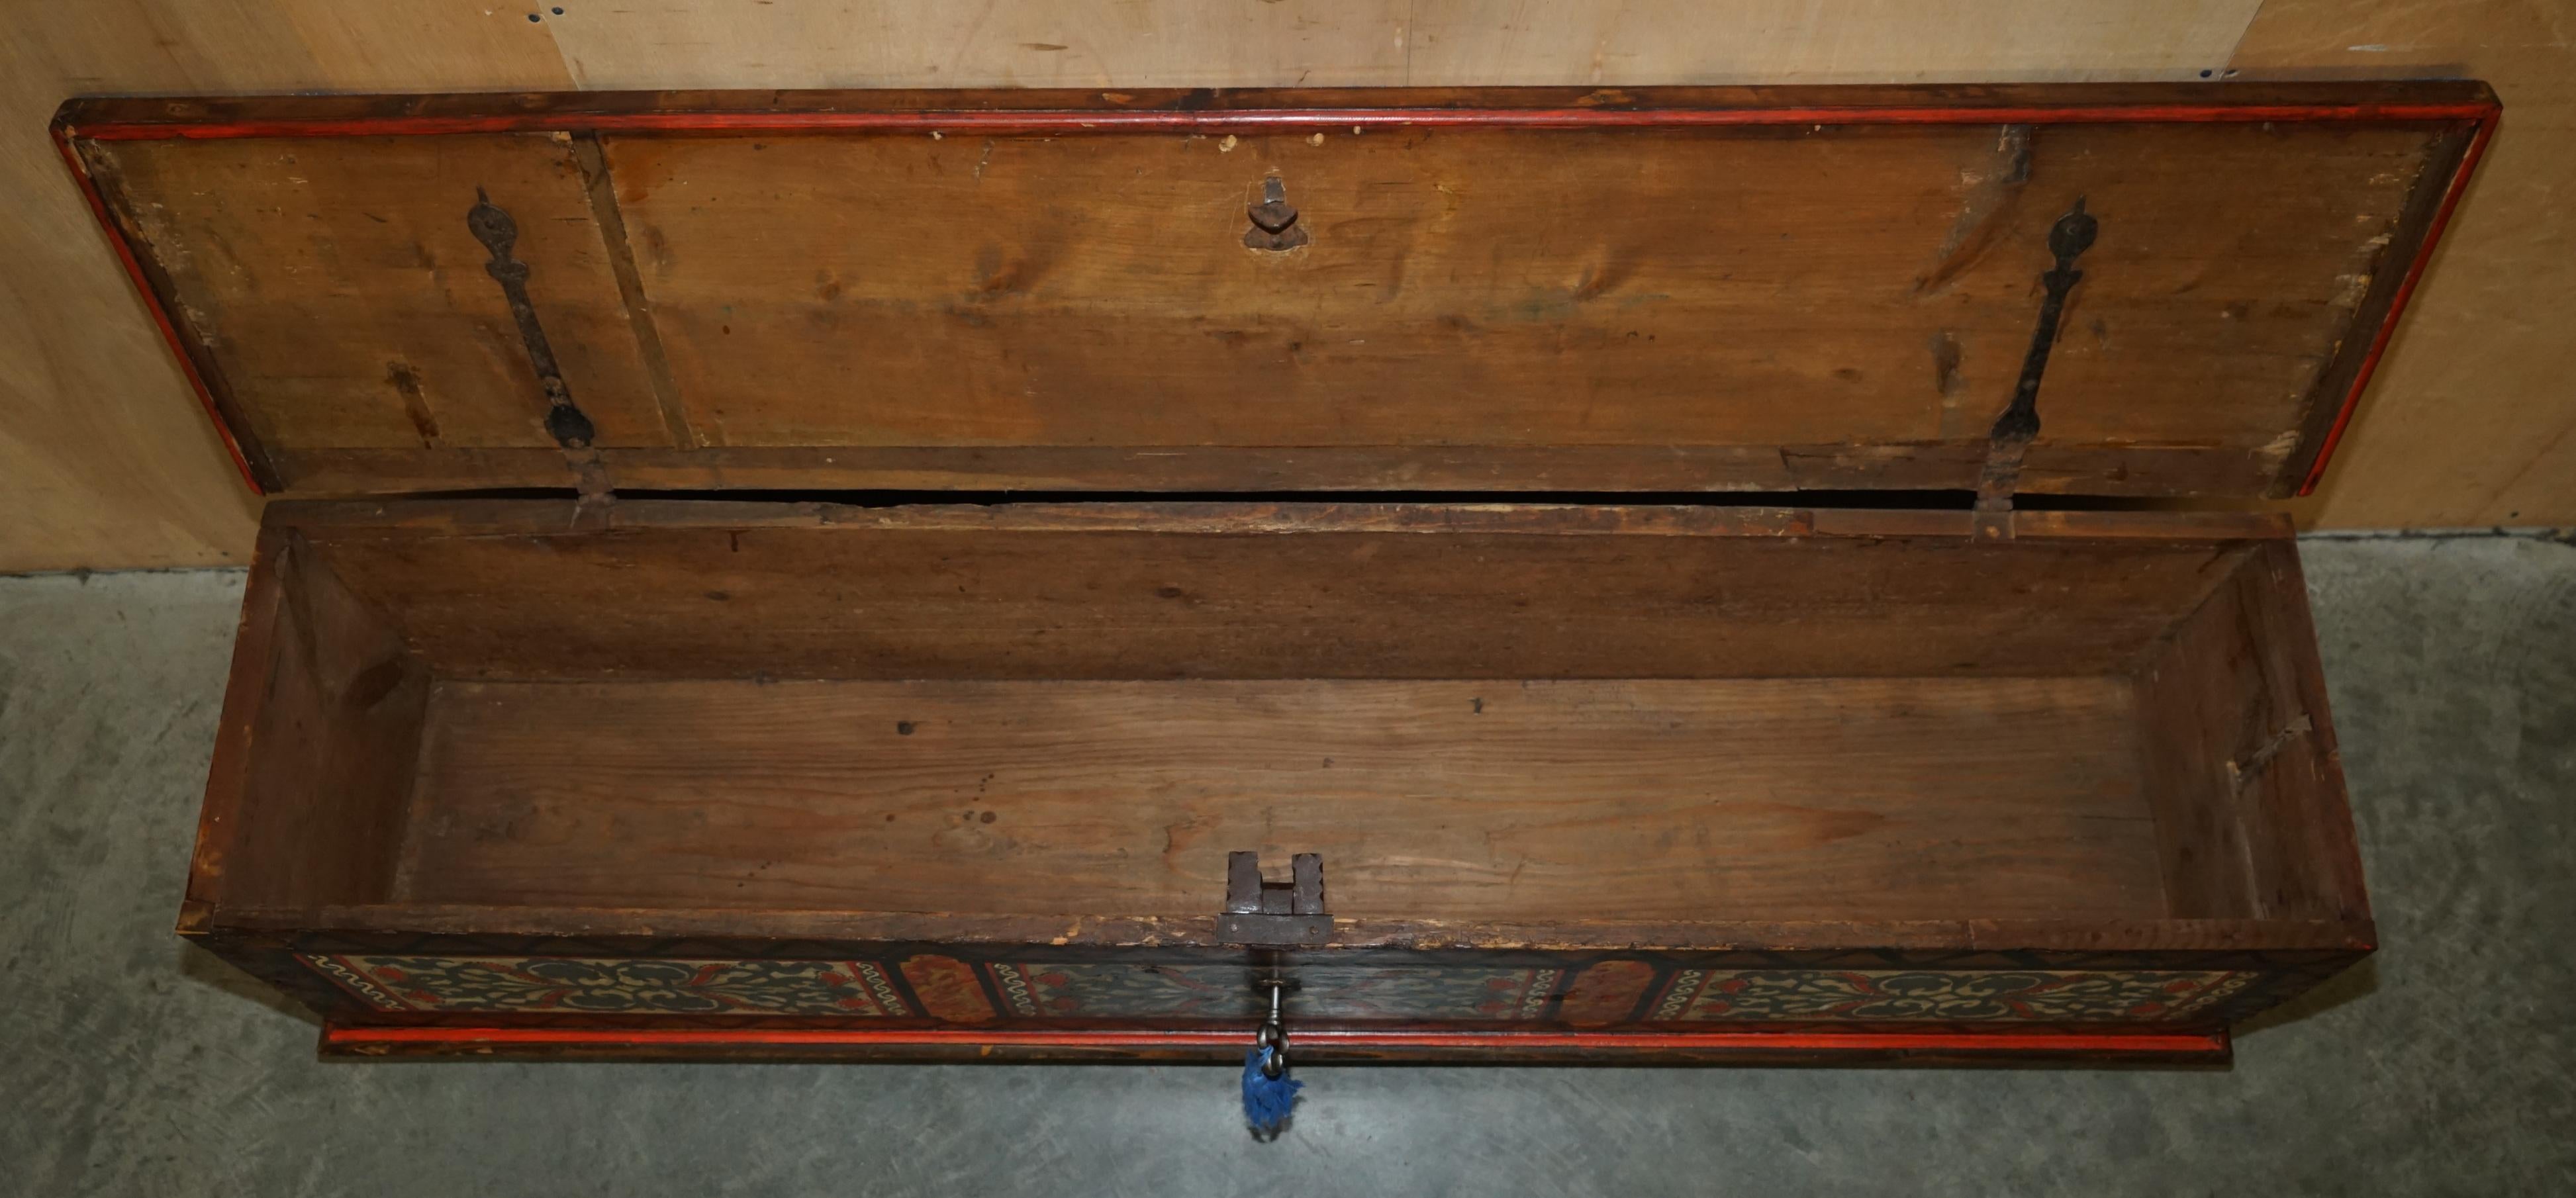 EXTRA LONG CIRCA 1840 HAND PAiNTED COFFER TRUNK CHEST USED AS HALL BENCH SEATING For Sale 9